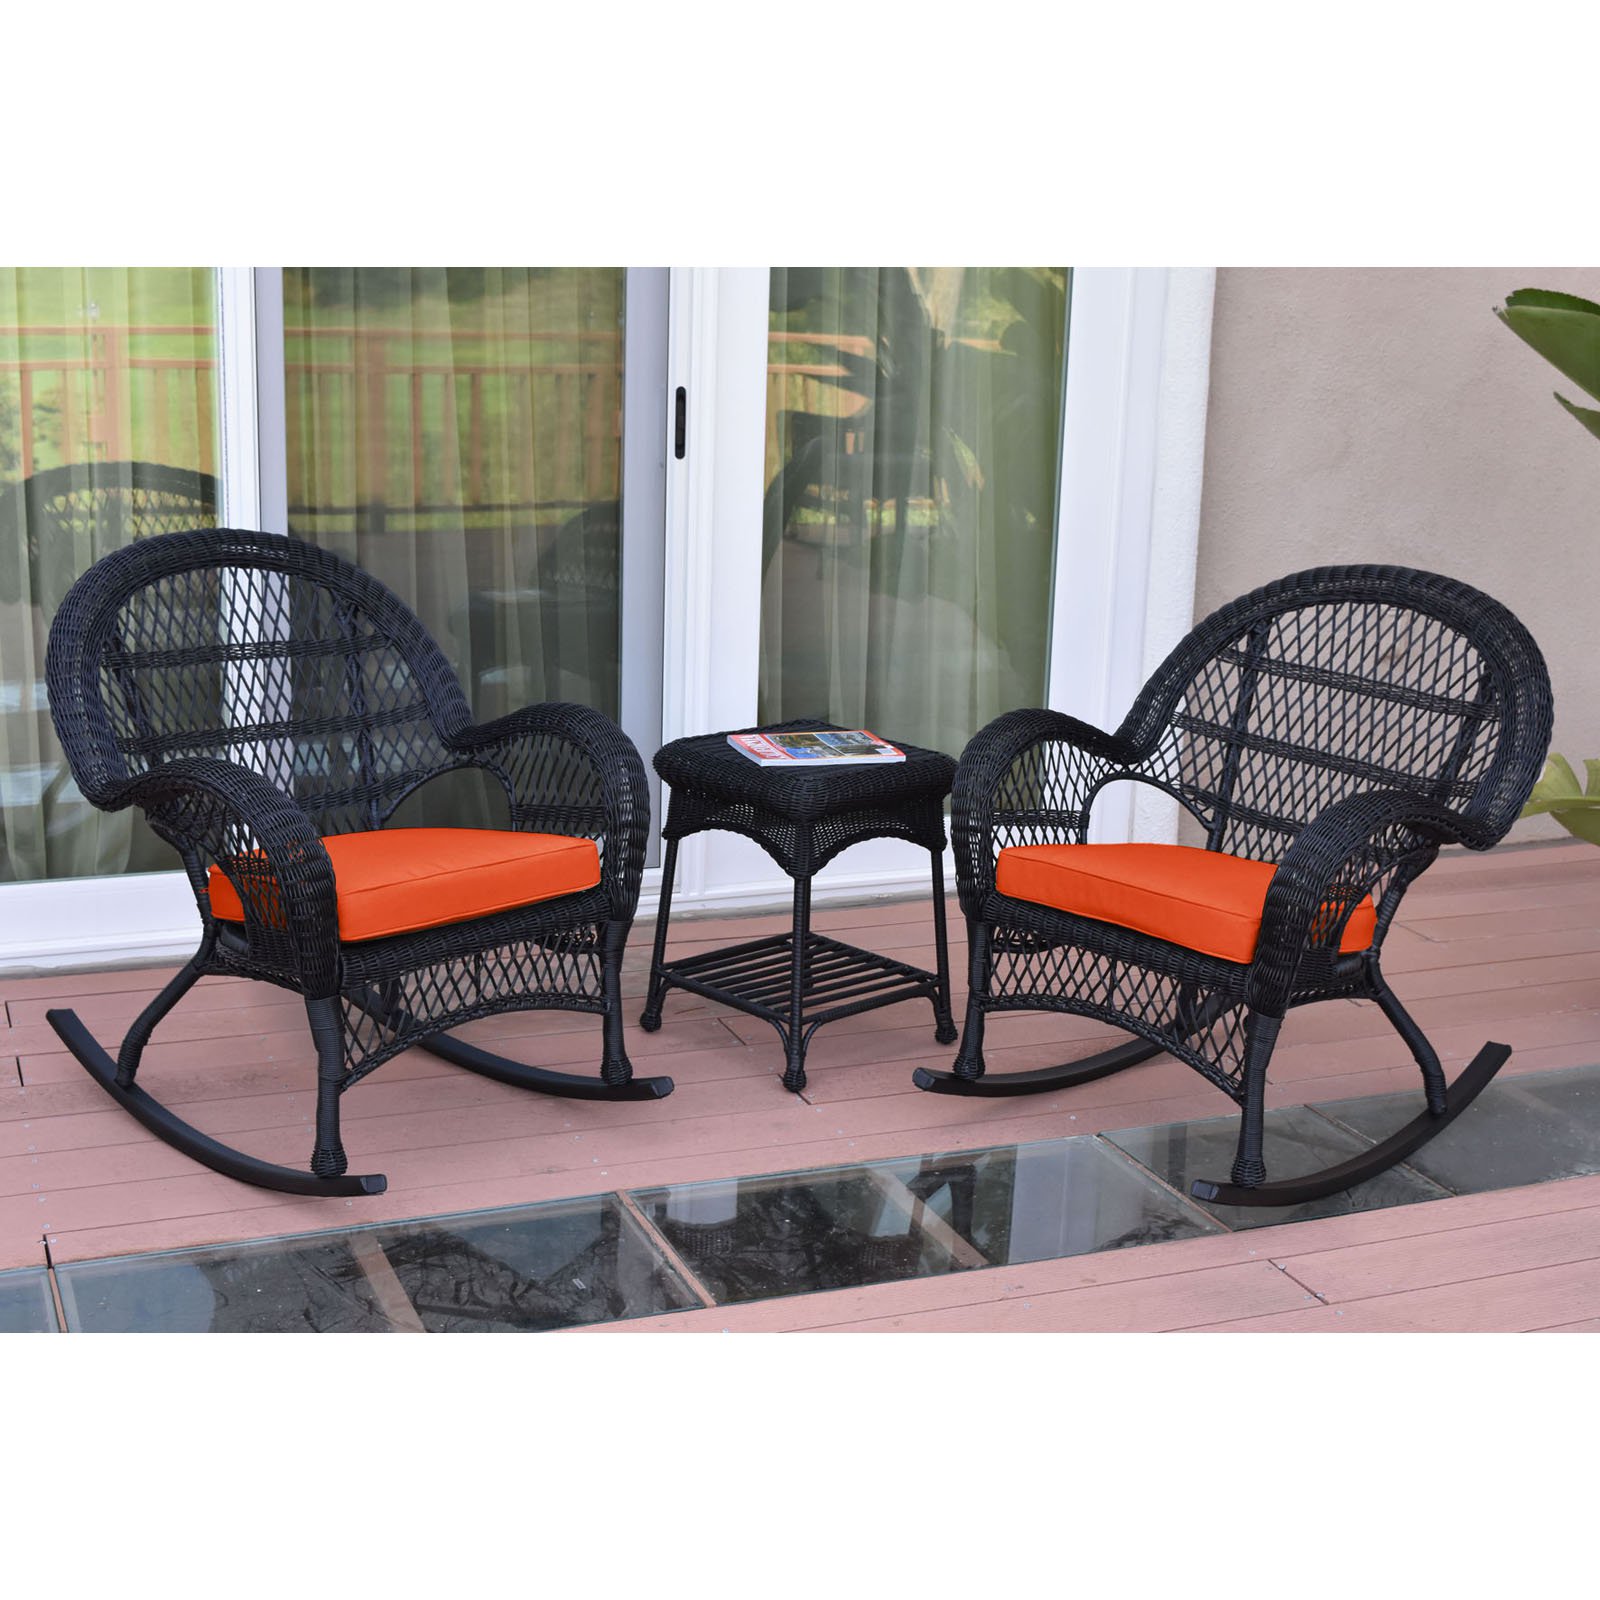 Jeco Santa Maria 3 Piece Wicker Rocker Chat Set with Optional Cushion - image 1 of 11